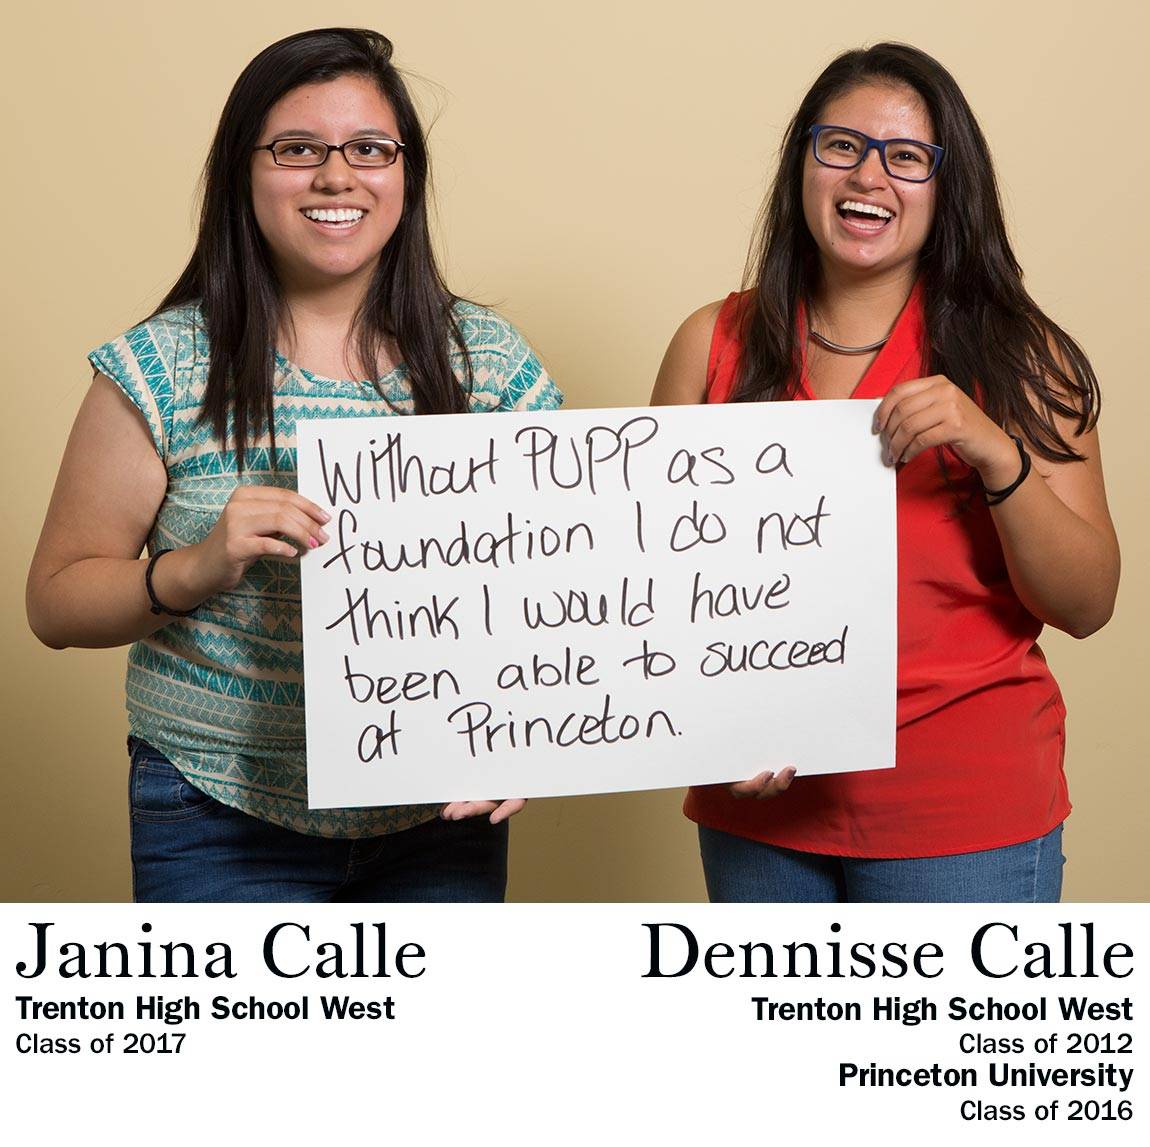 “Without PUPP as a foundation I do not think I would have been able to succeed at Princeton.” Janina Calle, Trenton High School West Class of 2017 AND Dennisse Calle, Trenton High School West Class of 2012, Princeton University Class of 2016